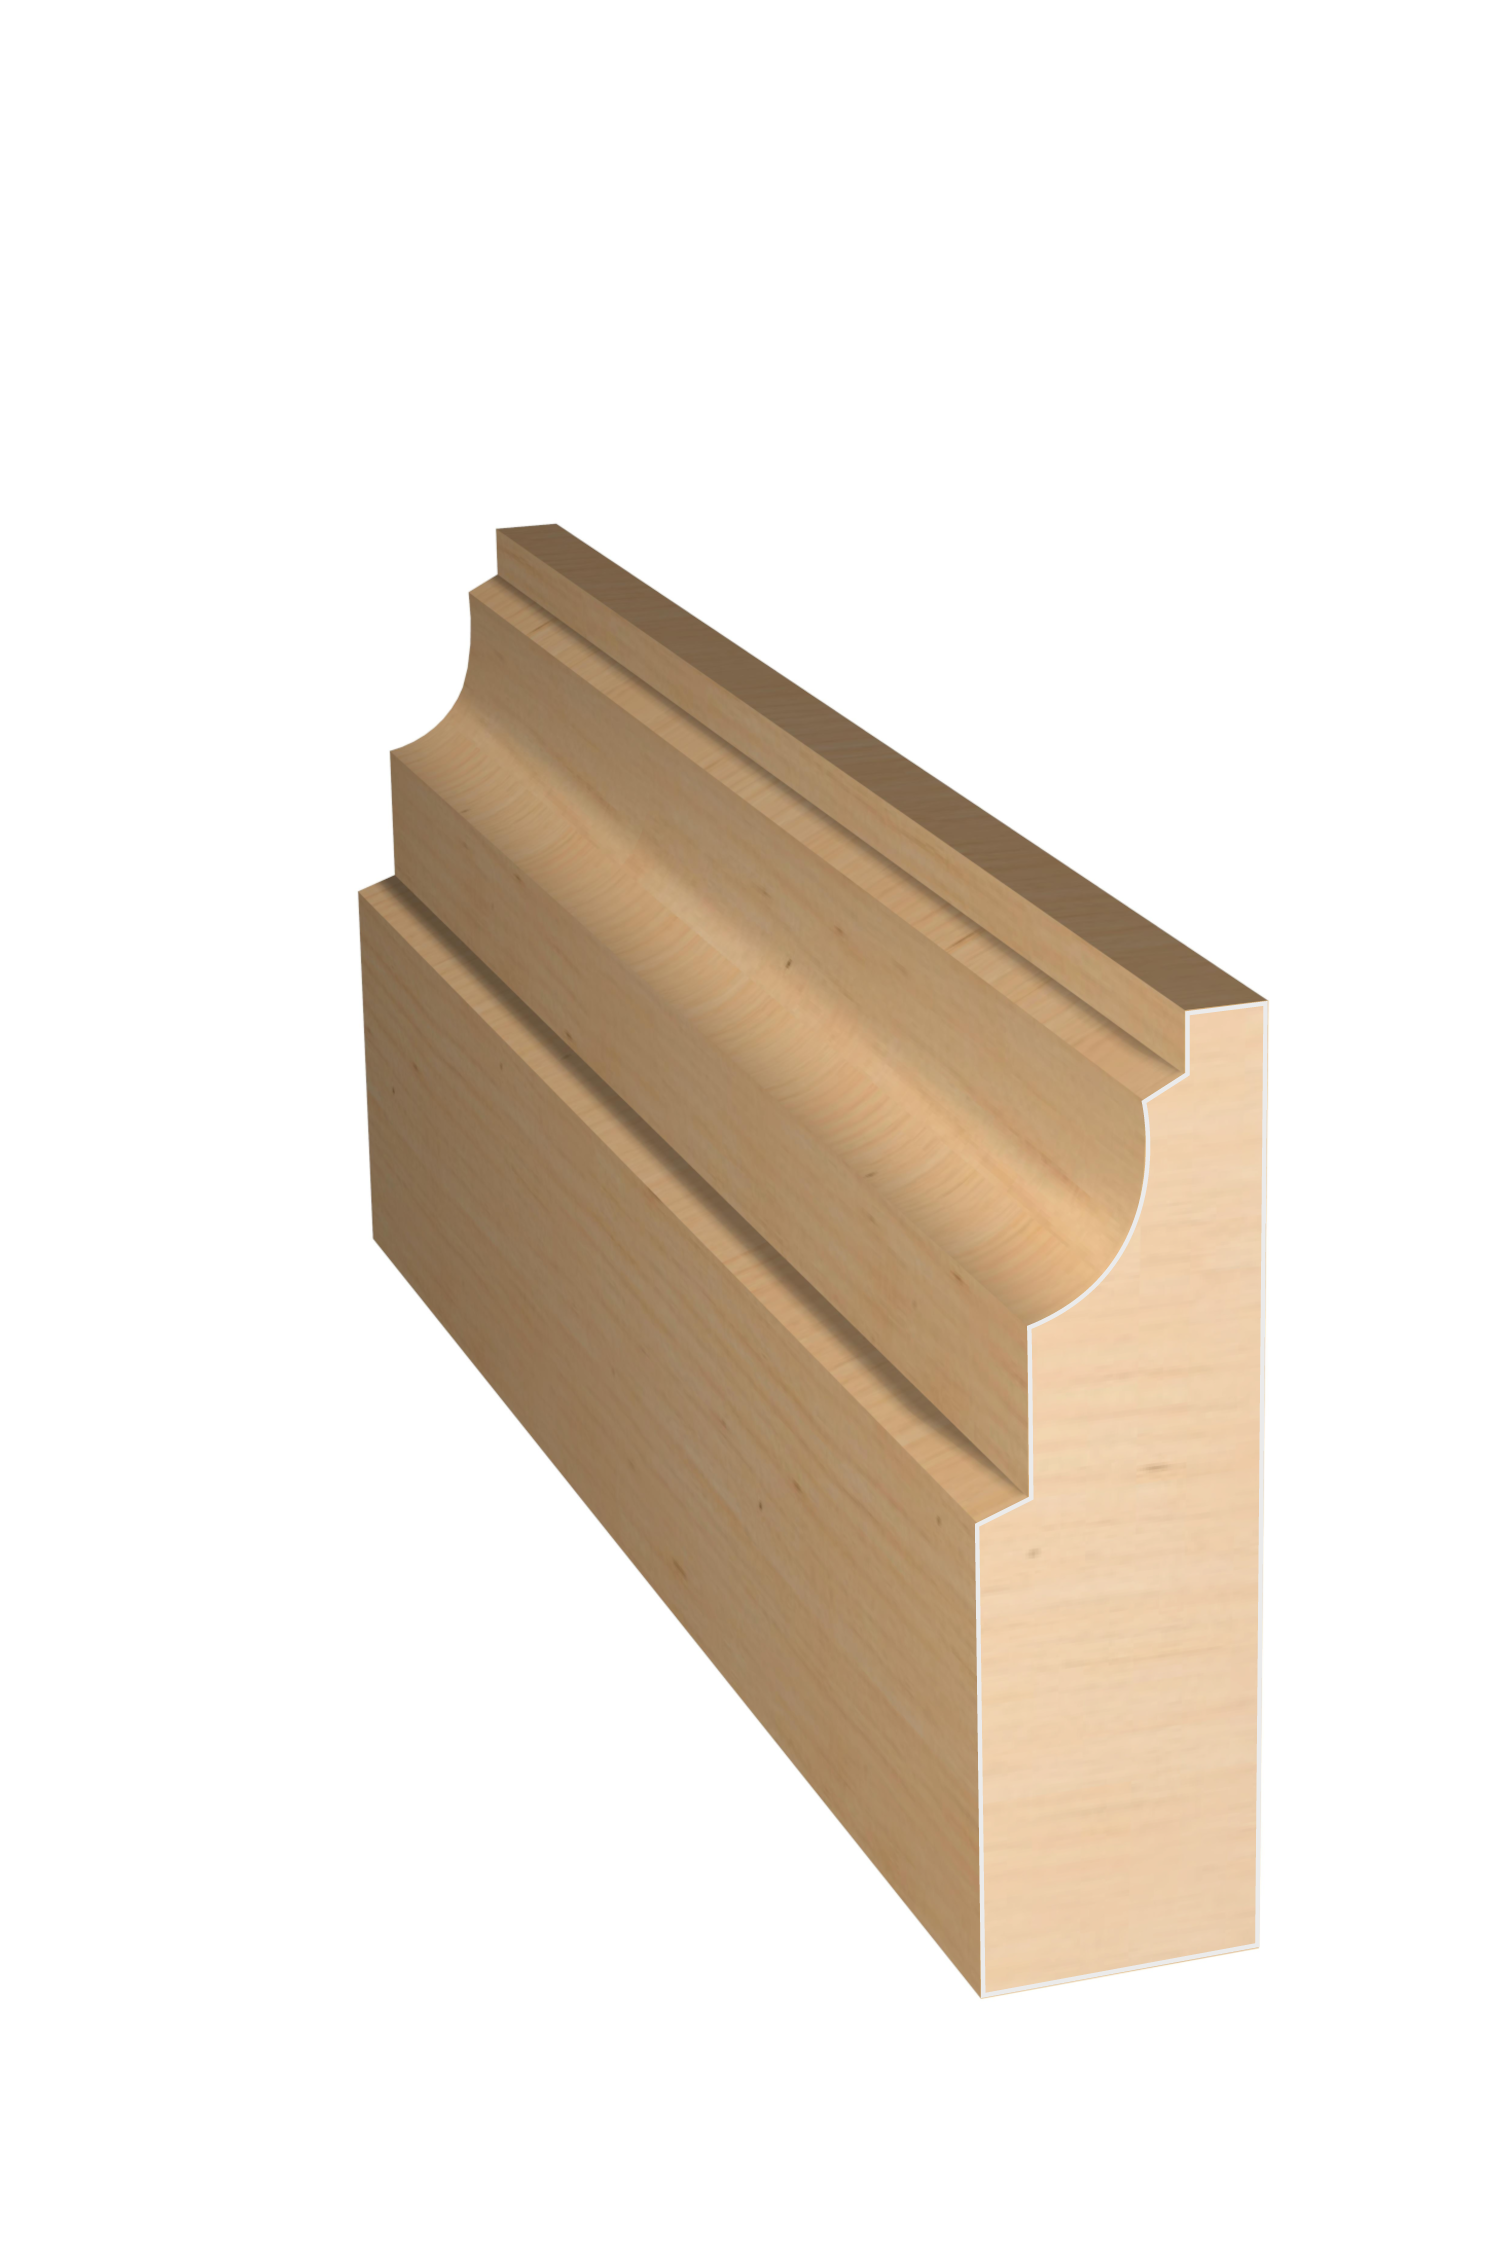 Three dimensional rendering of custom casing wood molding CAPL21226 made by Public Lumber Company in Detroit.